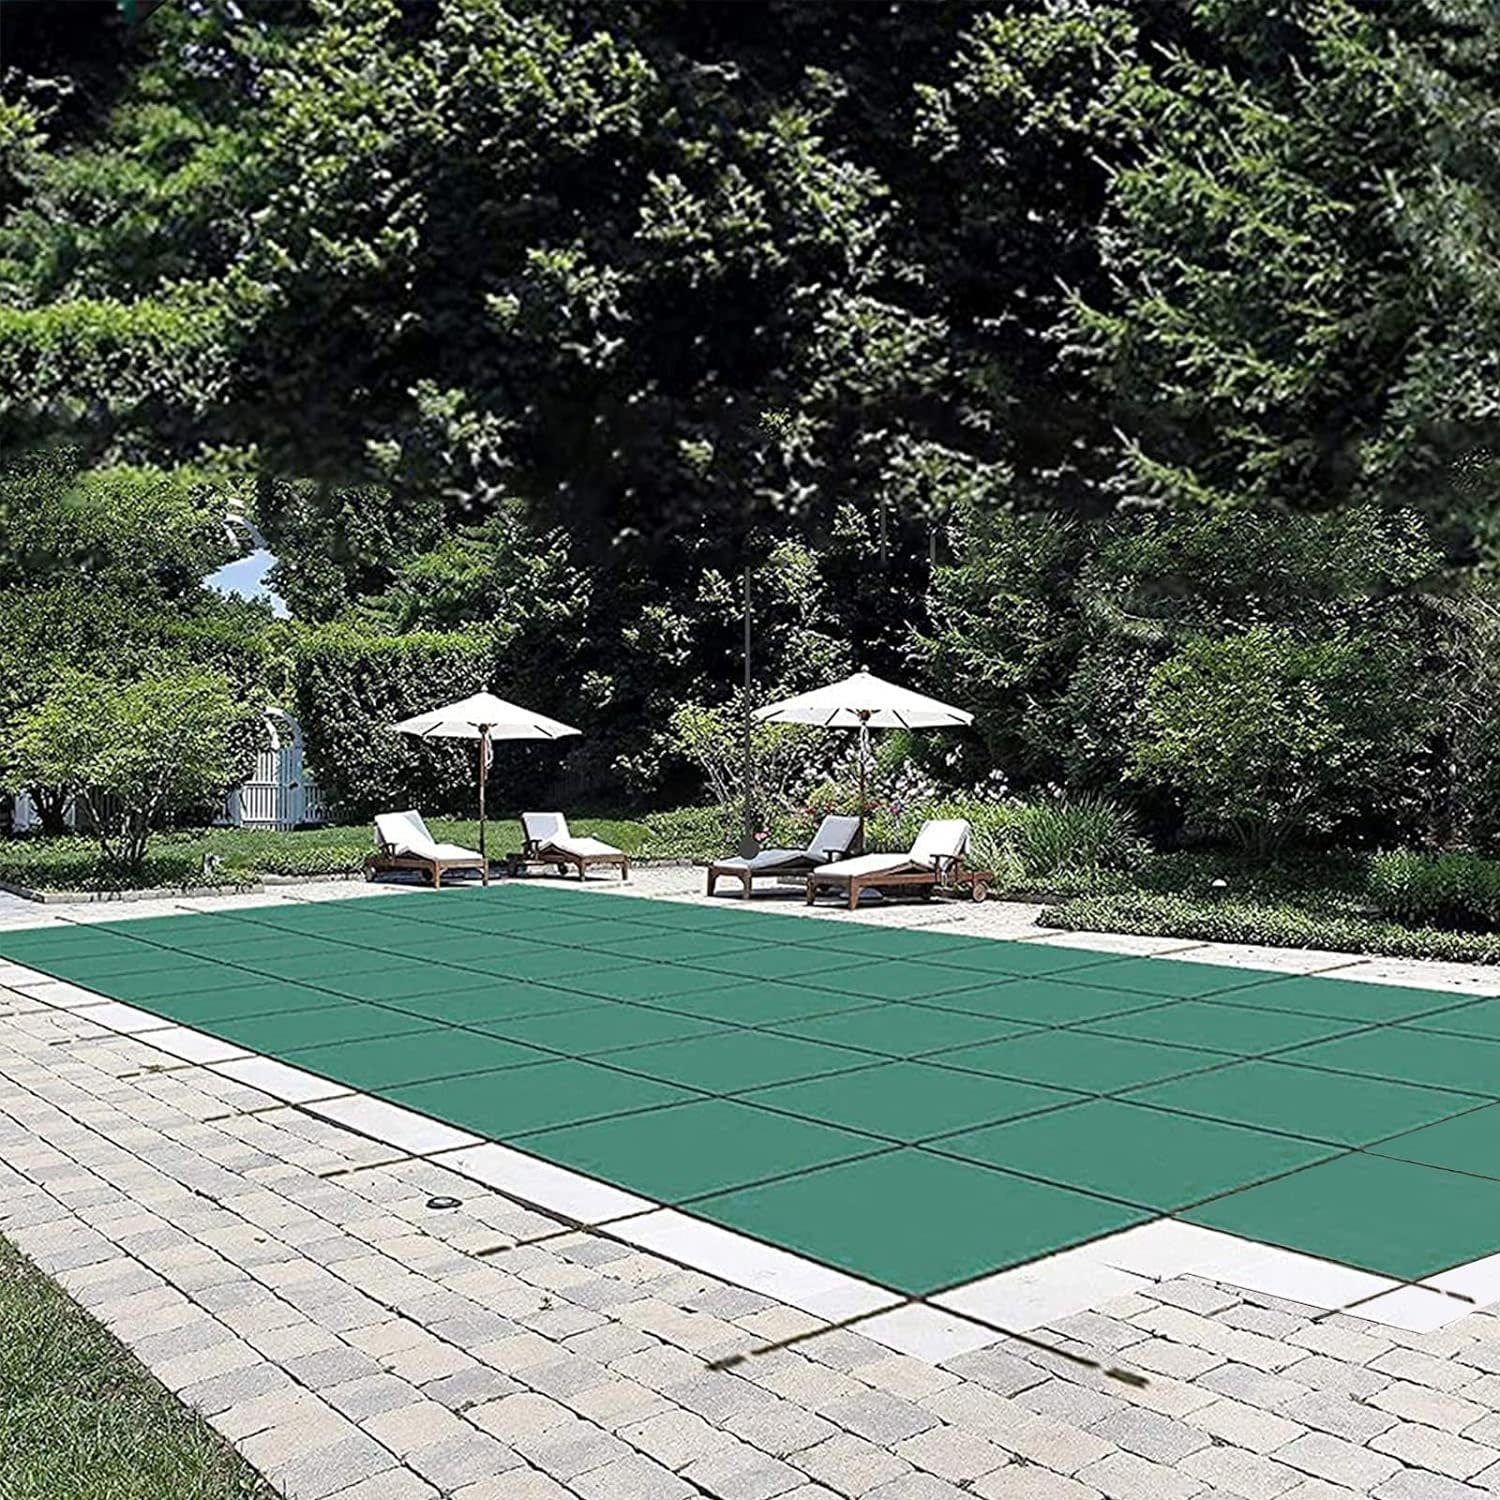 Happybuy Pool Safety Cover Fits18x36ft Inground Safety Pool Cover Green  Mesh with 4x8ft Center End Steps Solid Pool Safety Cover for Swimming Pool